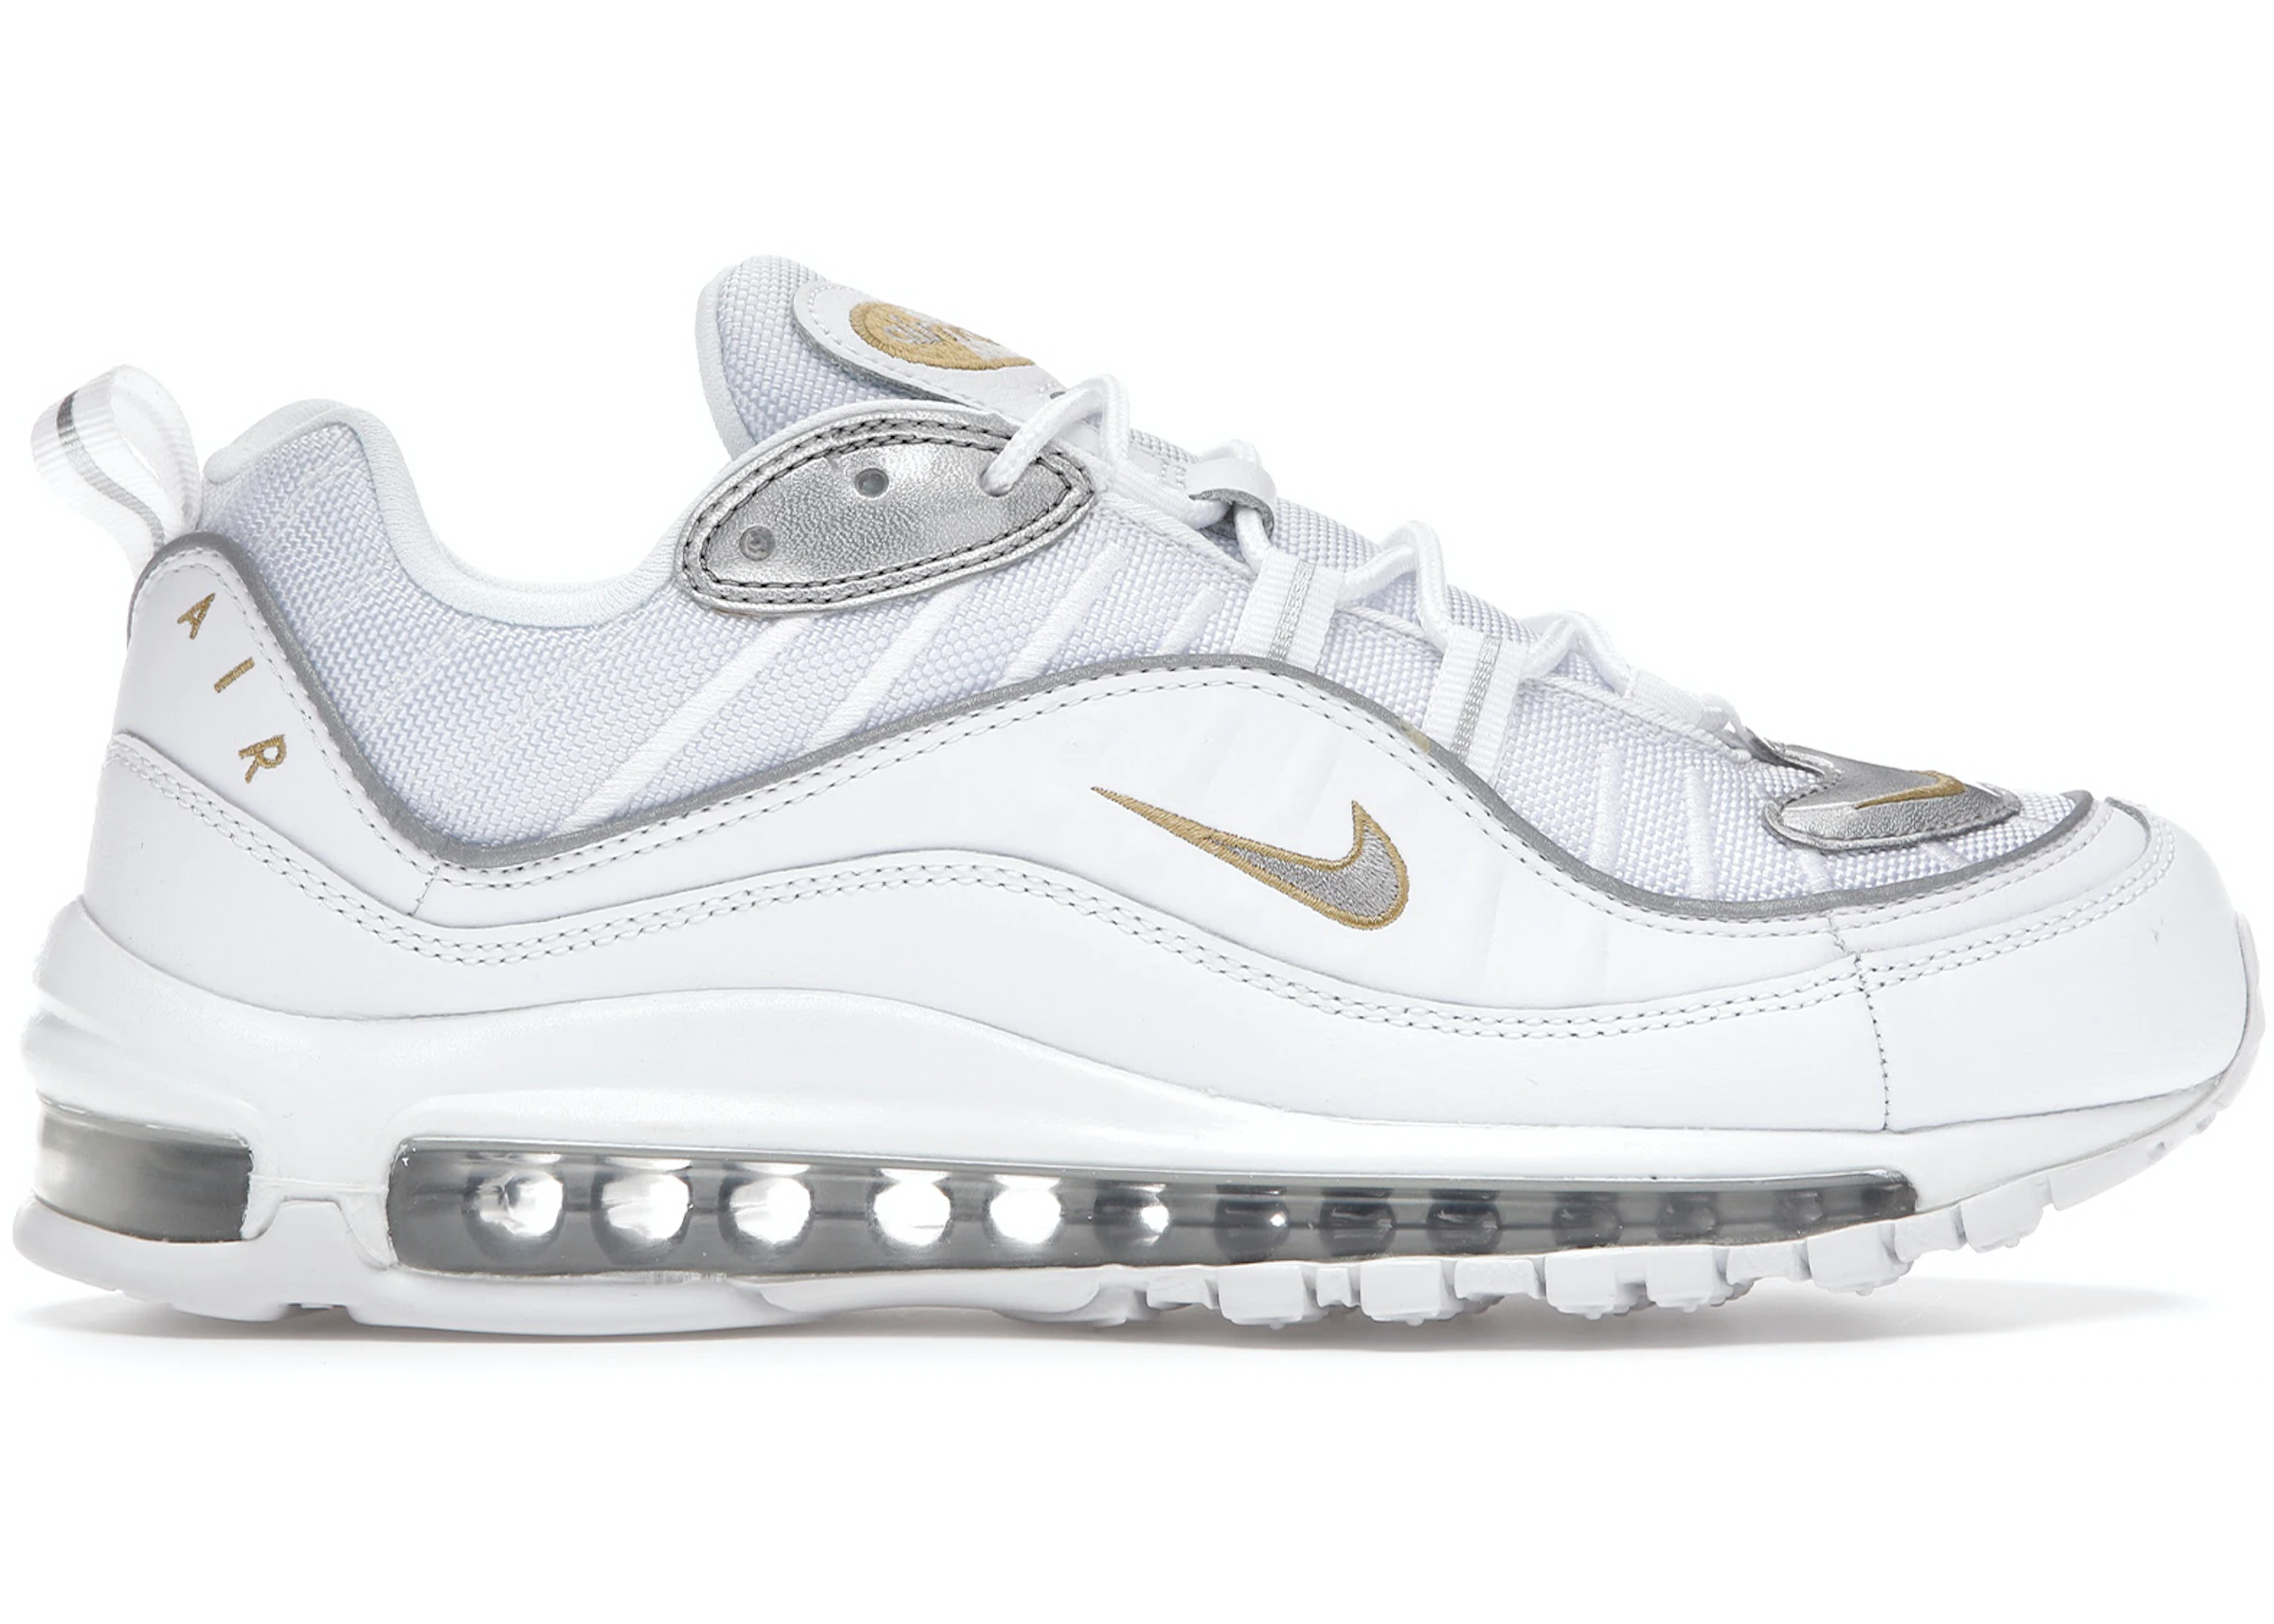 Search engine marketing Vinegar Tradition Nike Air Max 98 White Silver Gold (W) - CT2547-100 - US